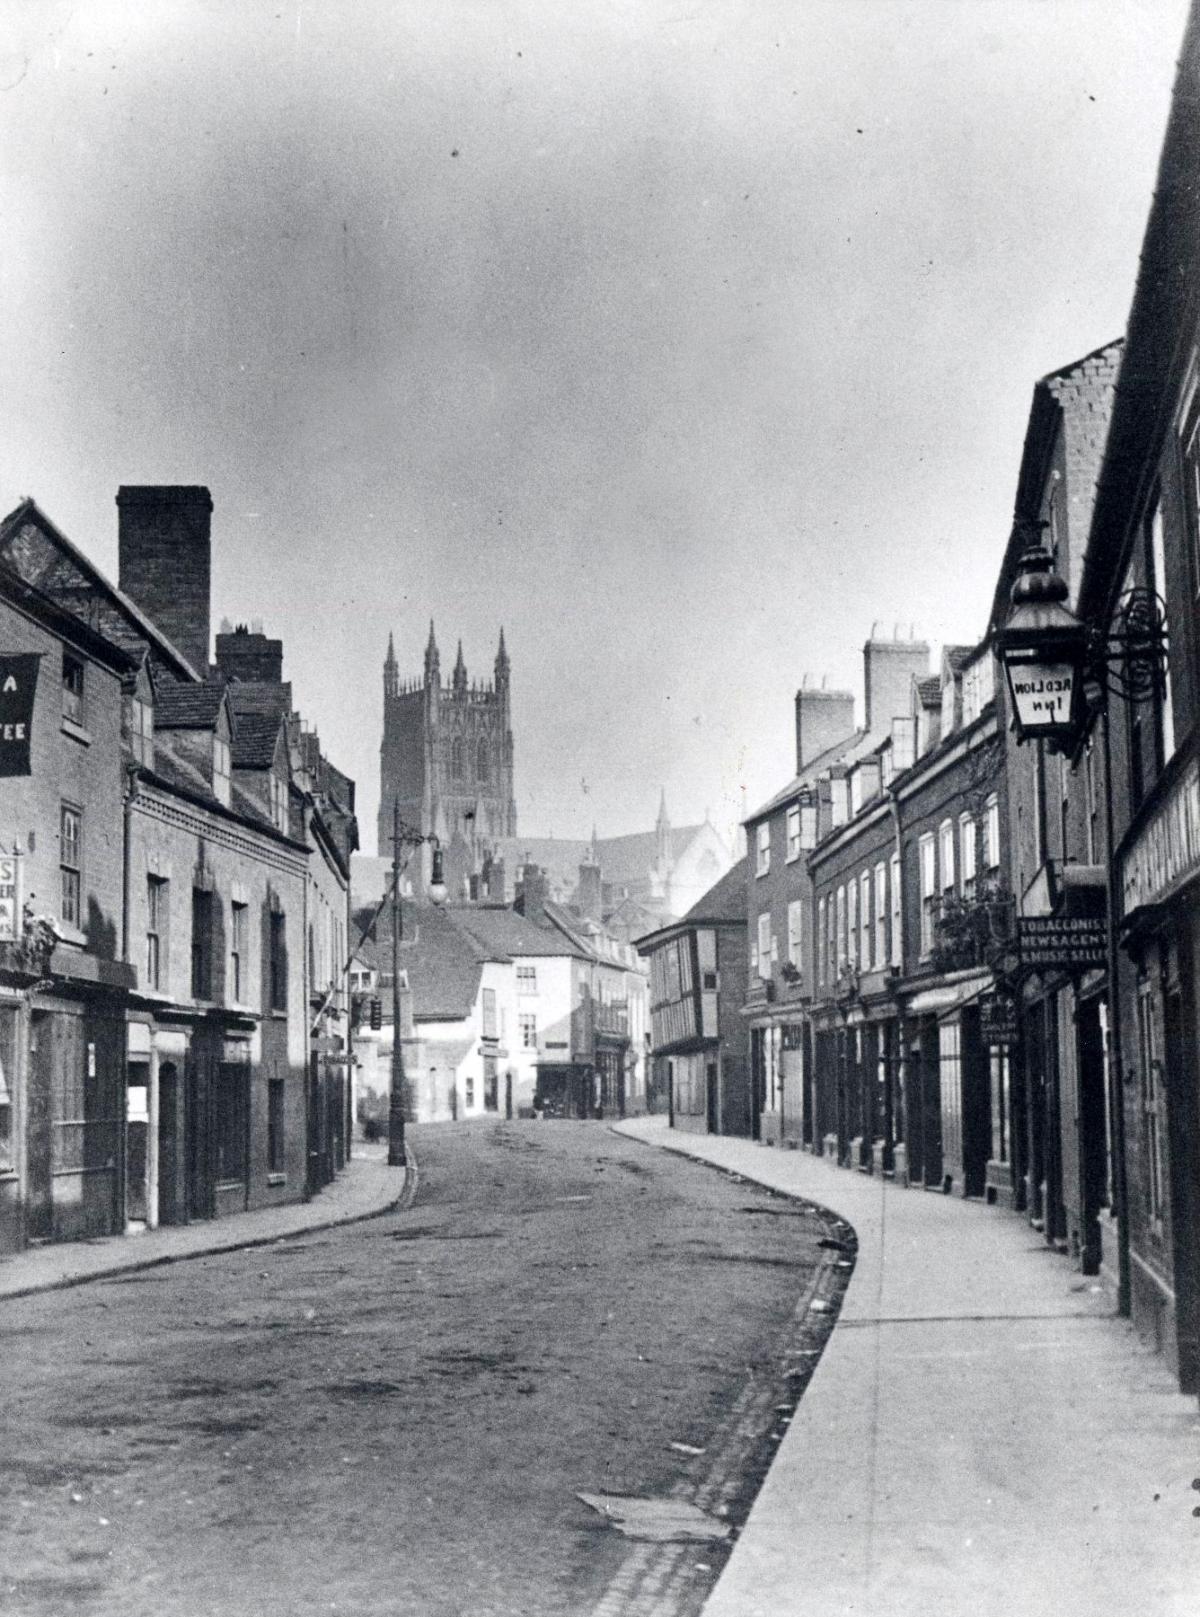 Vanished Worcester. Sidbury, Worcester, about 100 years ago, with shops lining its south side. The row of shops on the right side of the scene, including the Commandery entrance building, thankfully still survive today